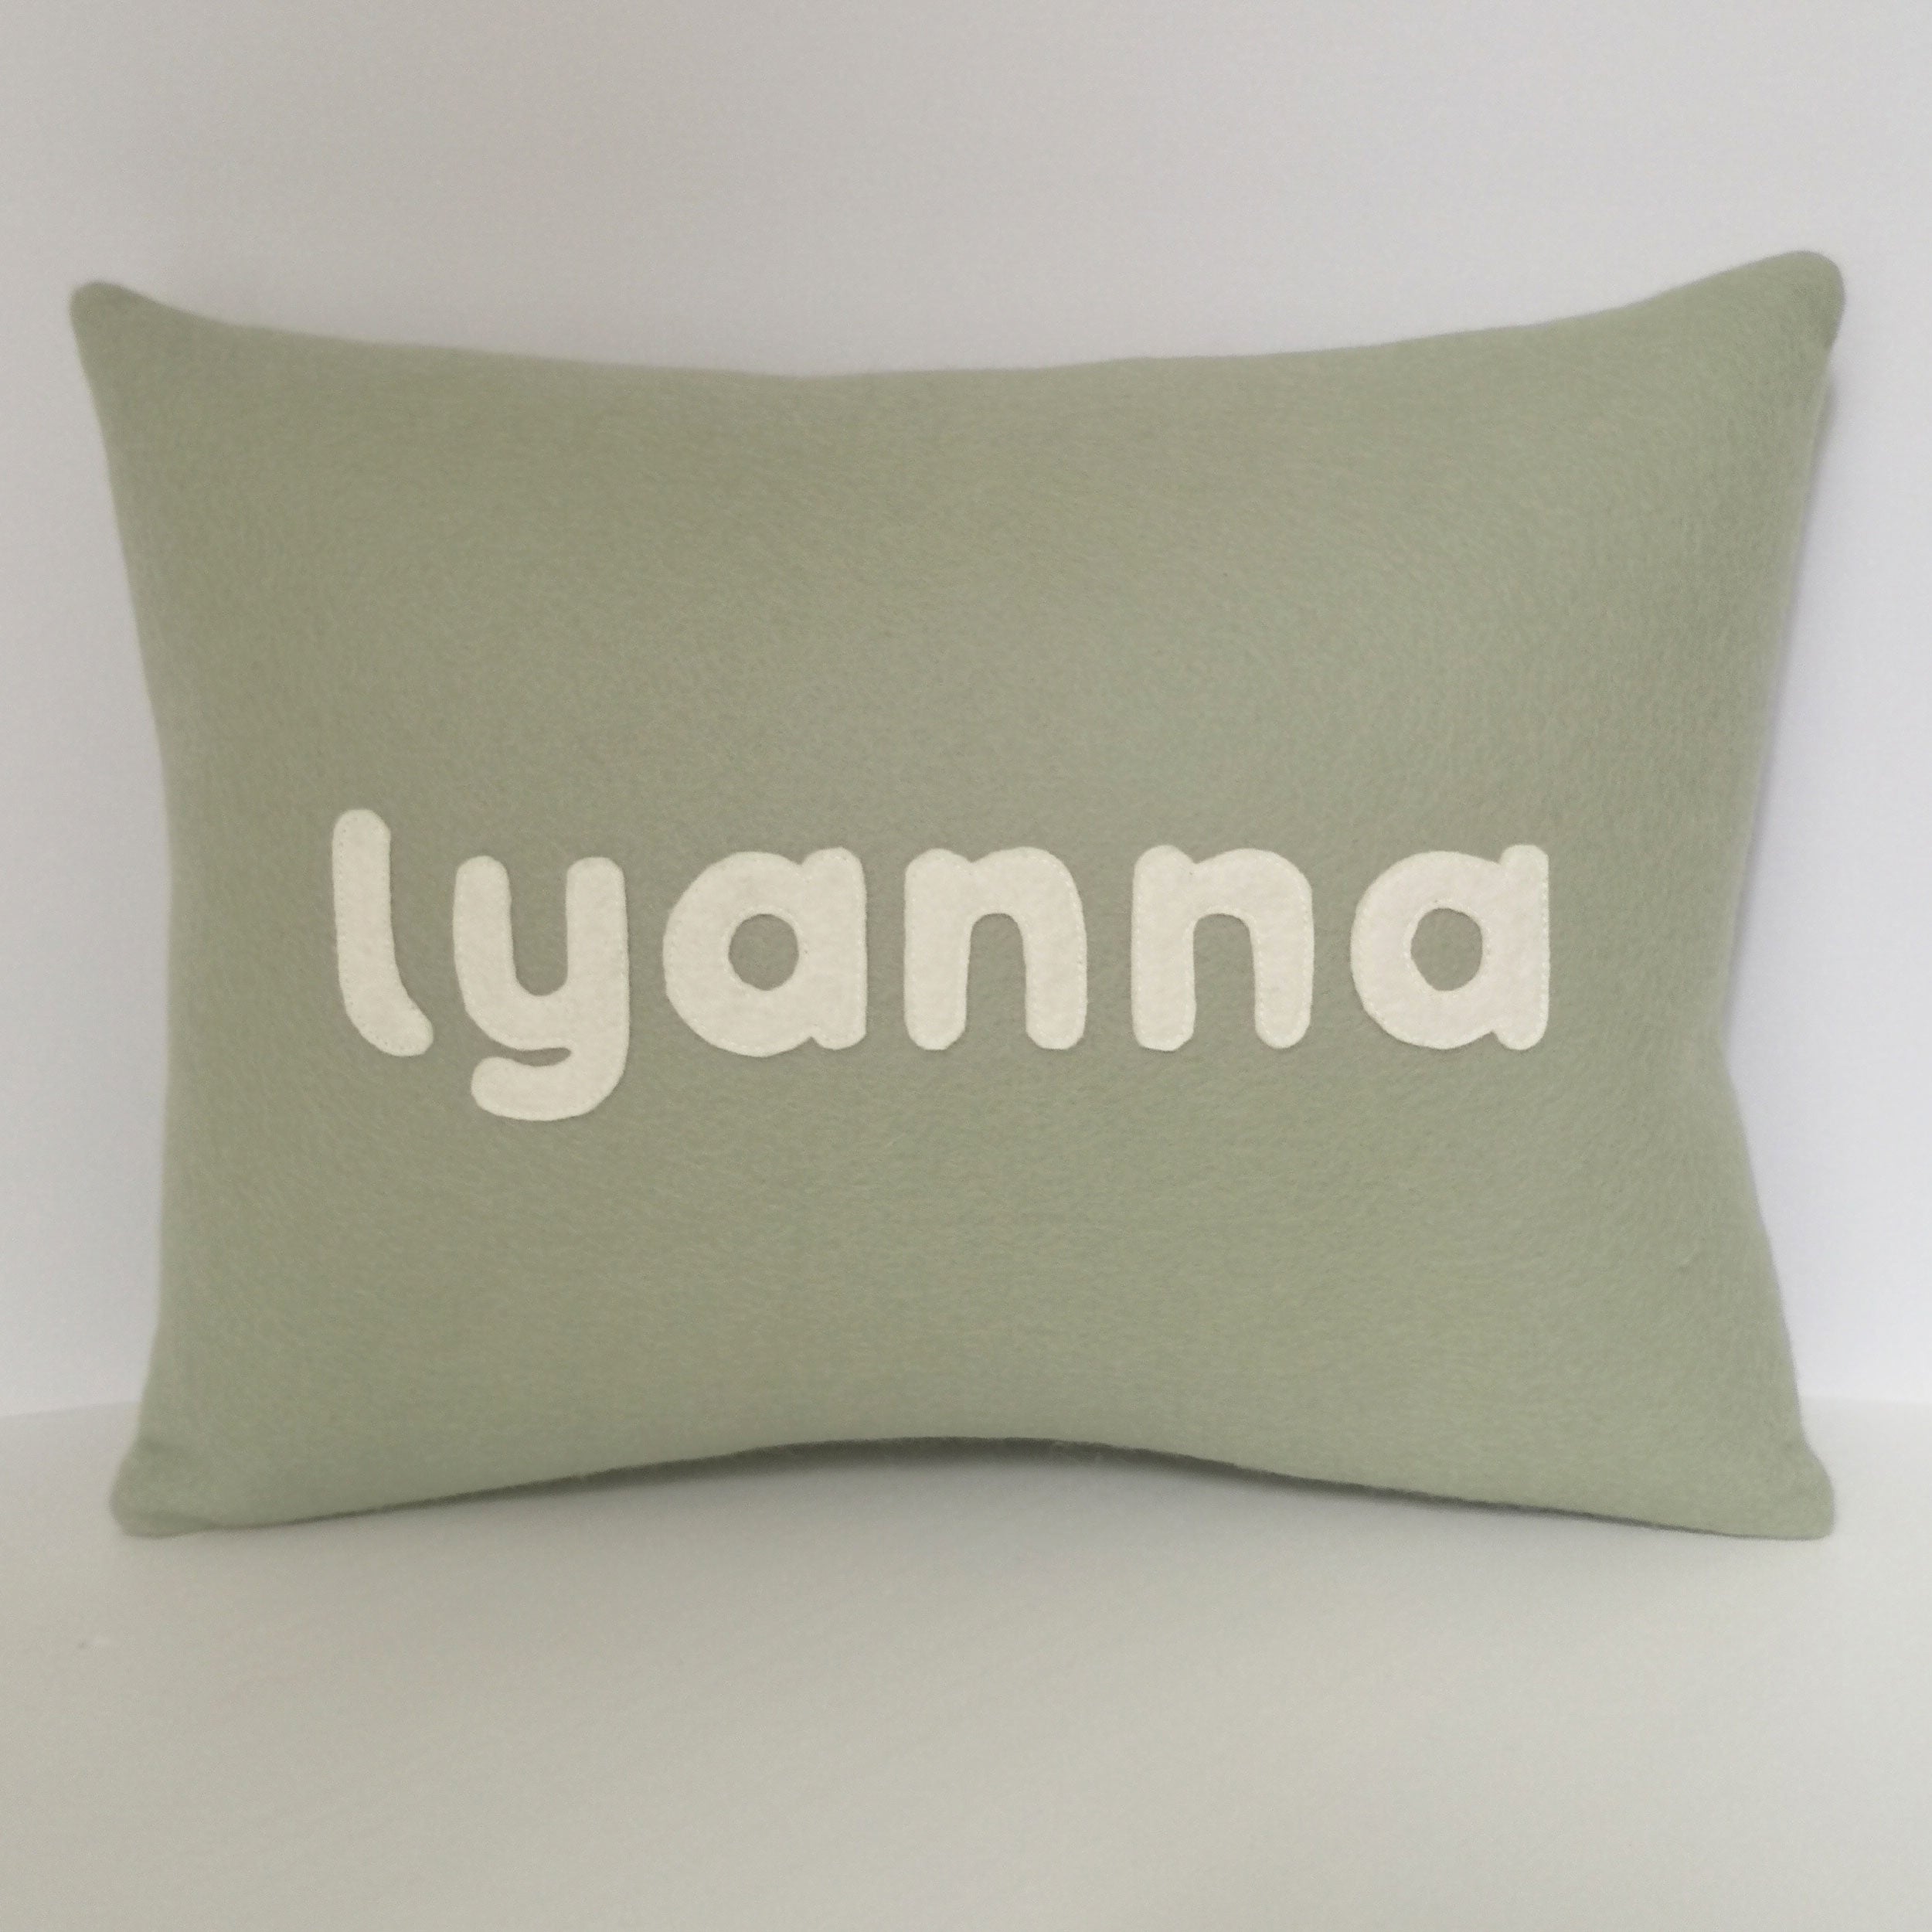 pistachio green personalised cushion with name